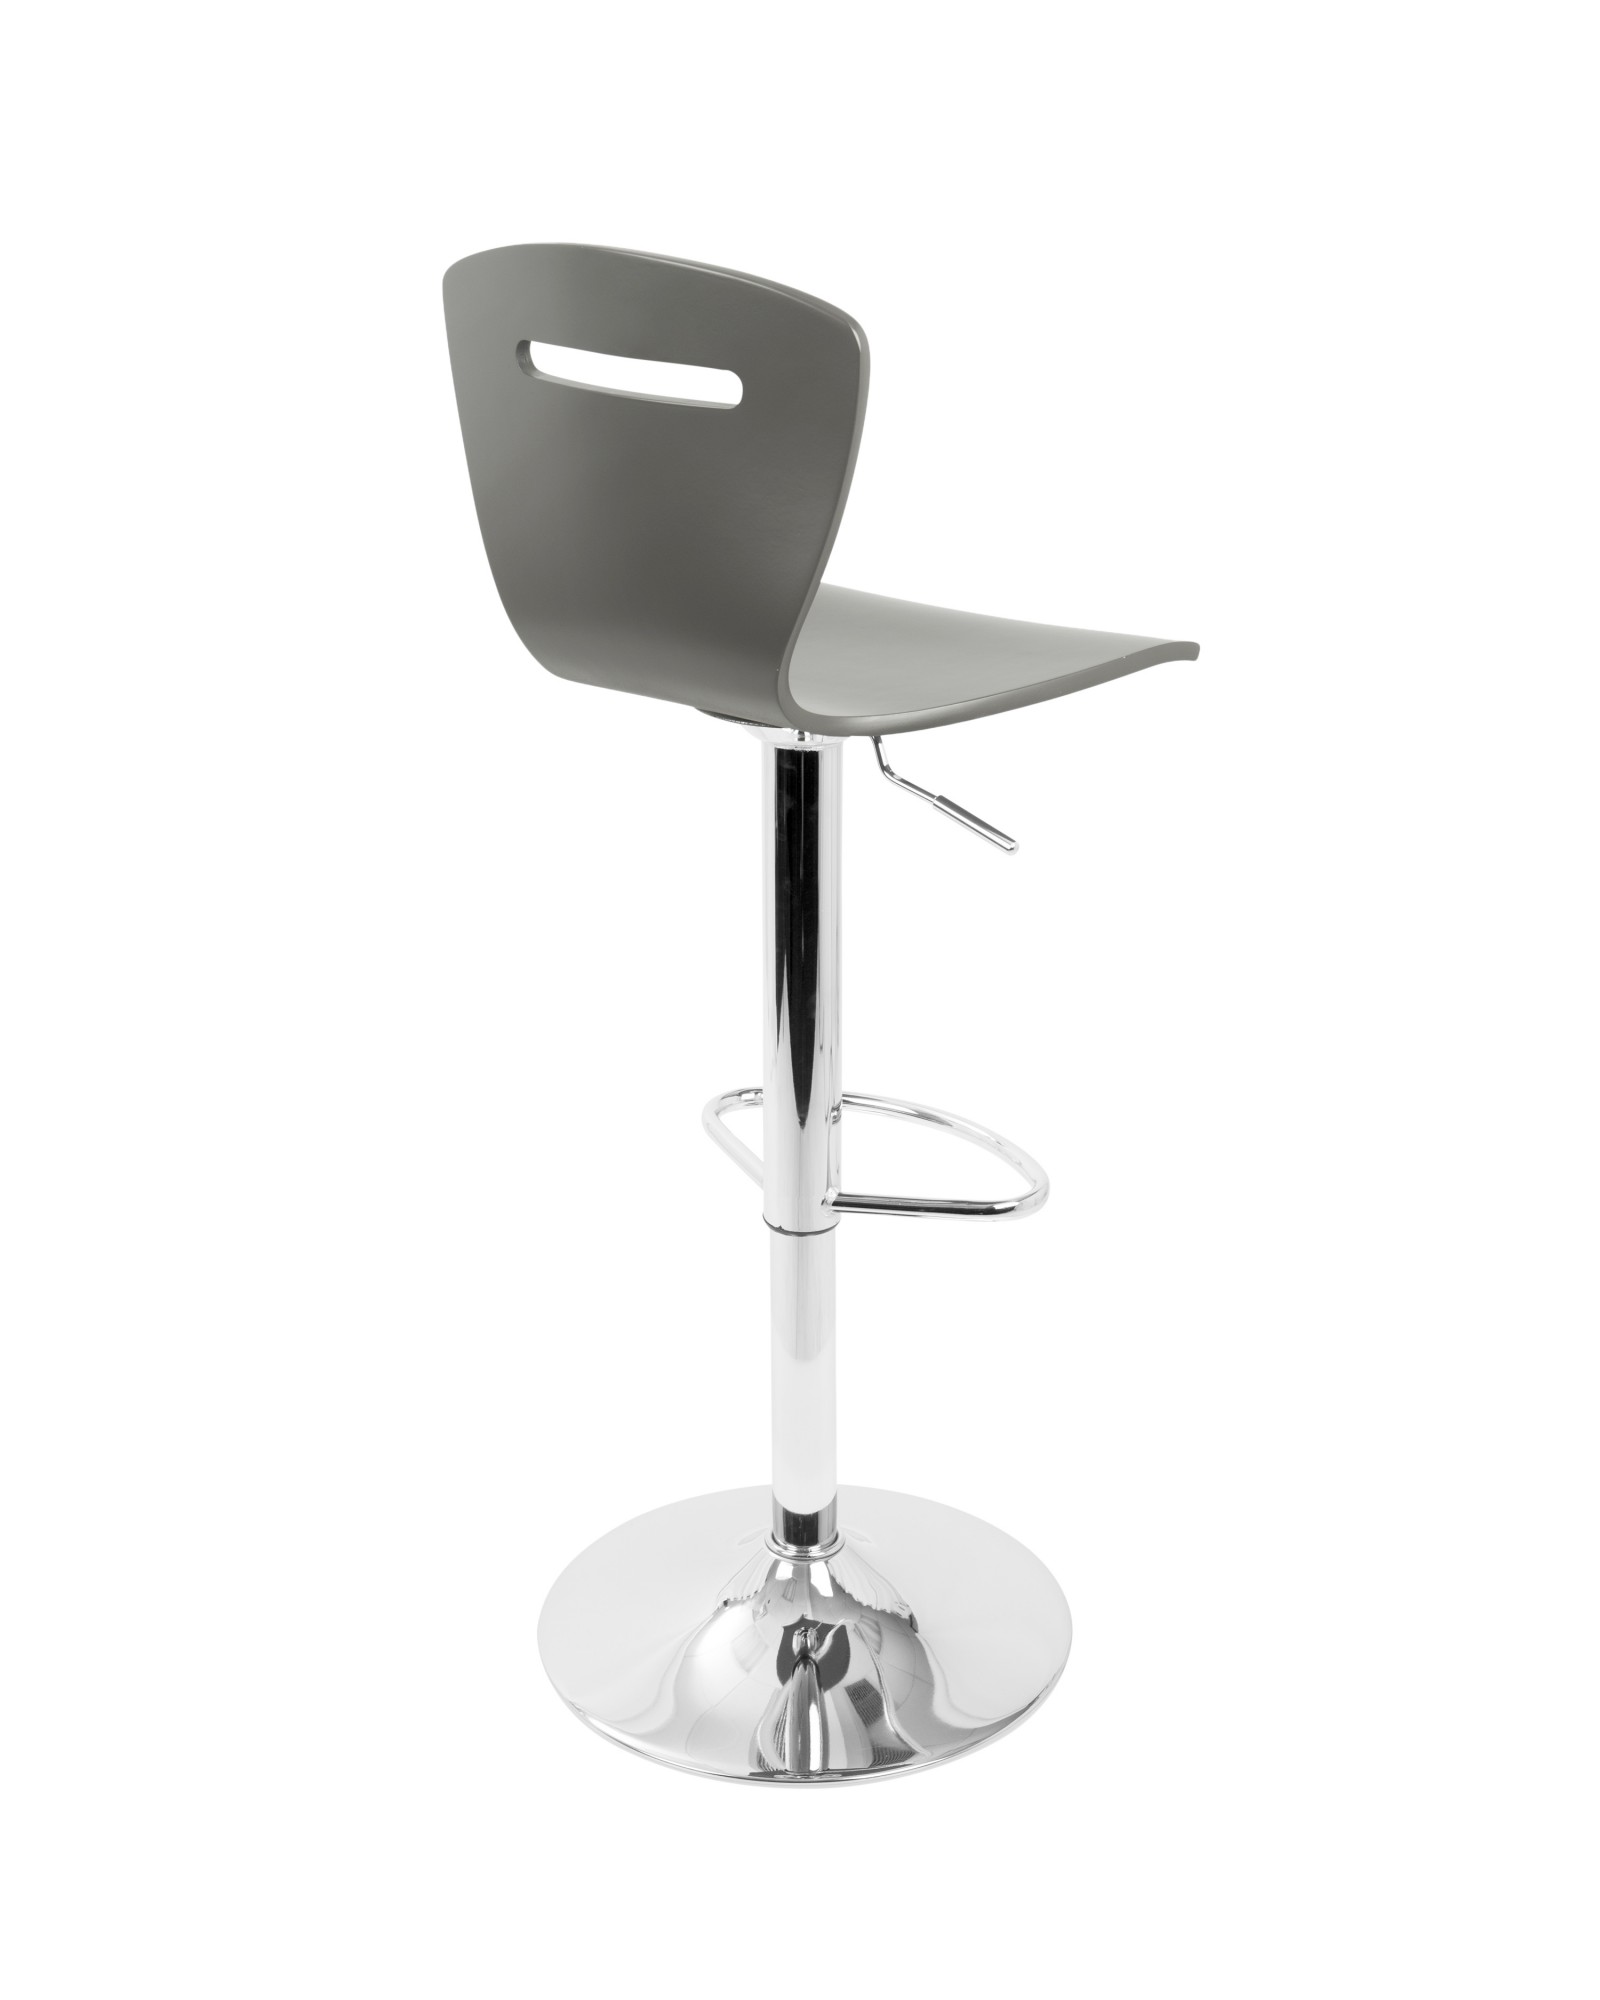 H2 Contemporary Adjustable Barstool in Grey Wood